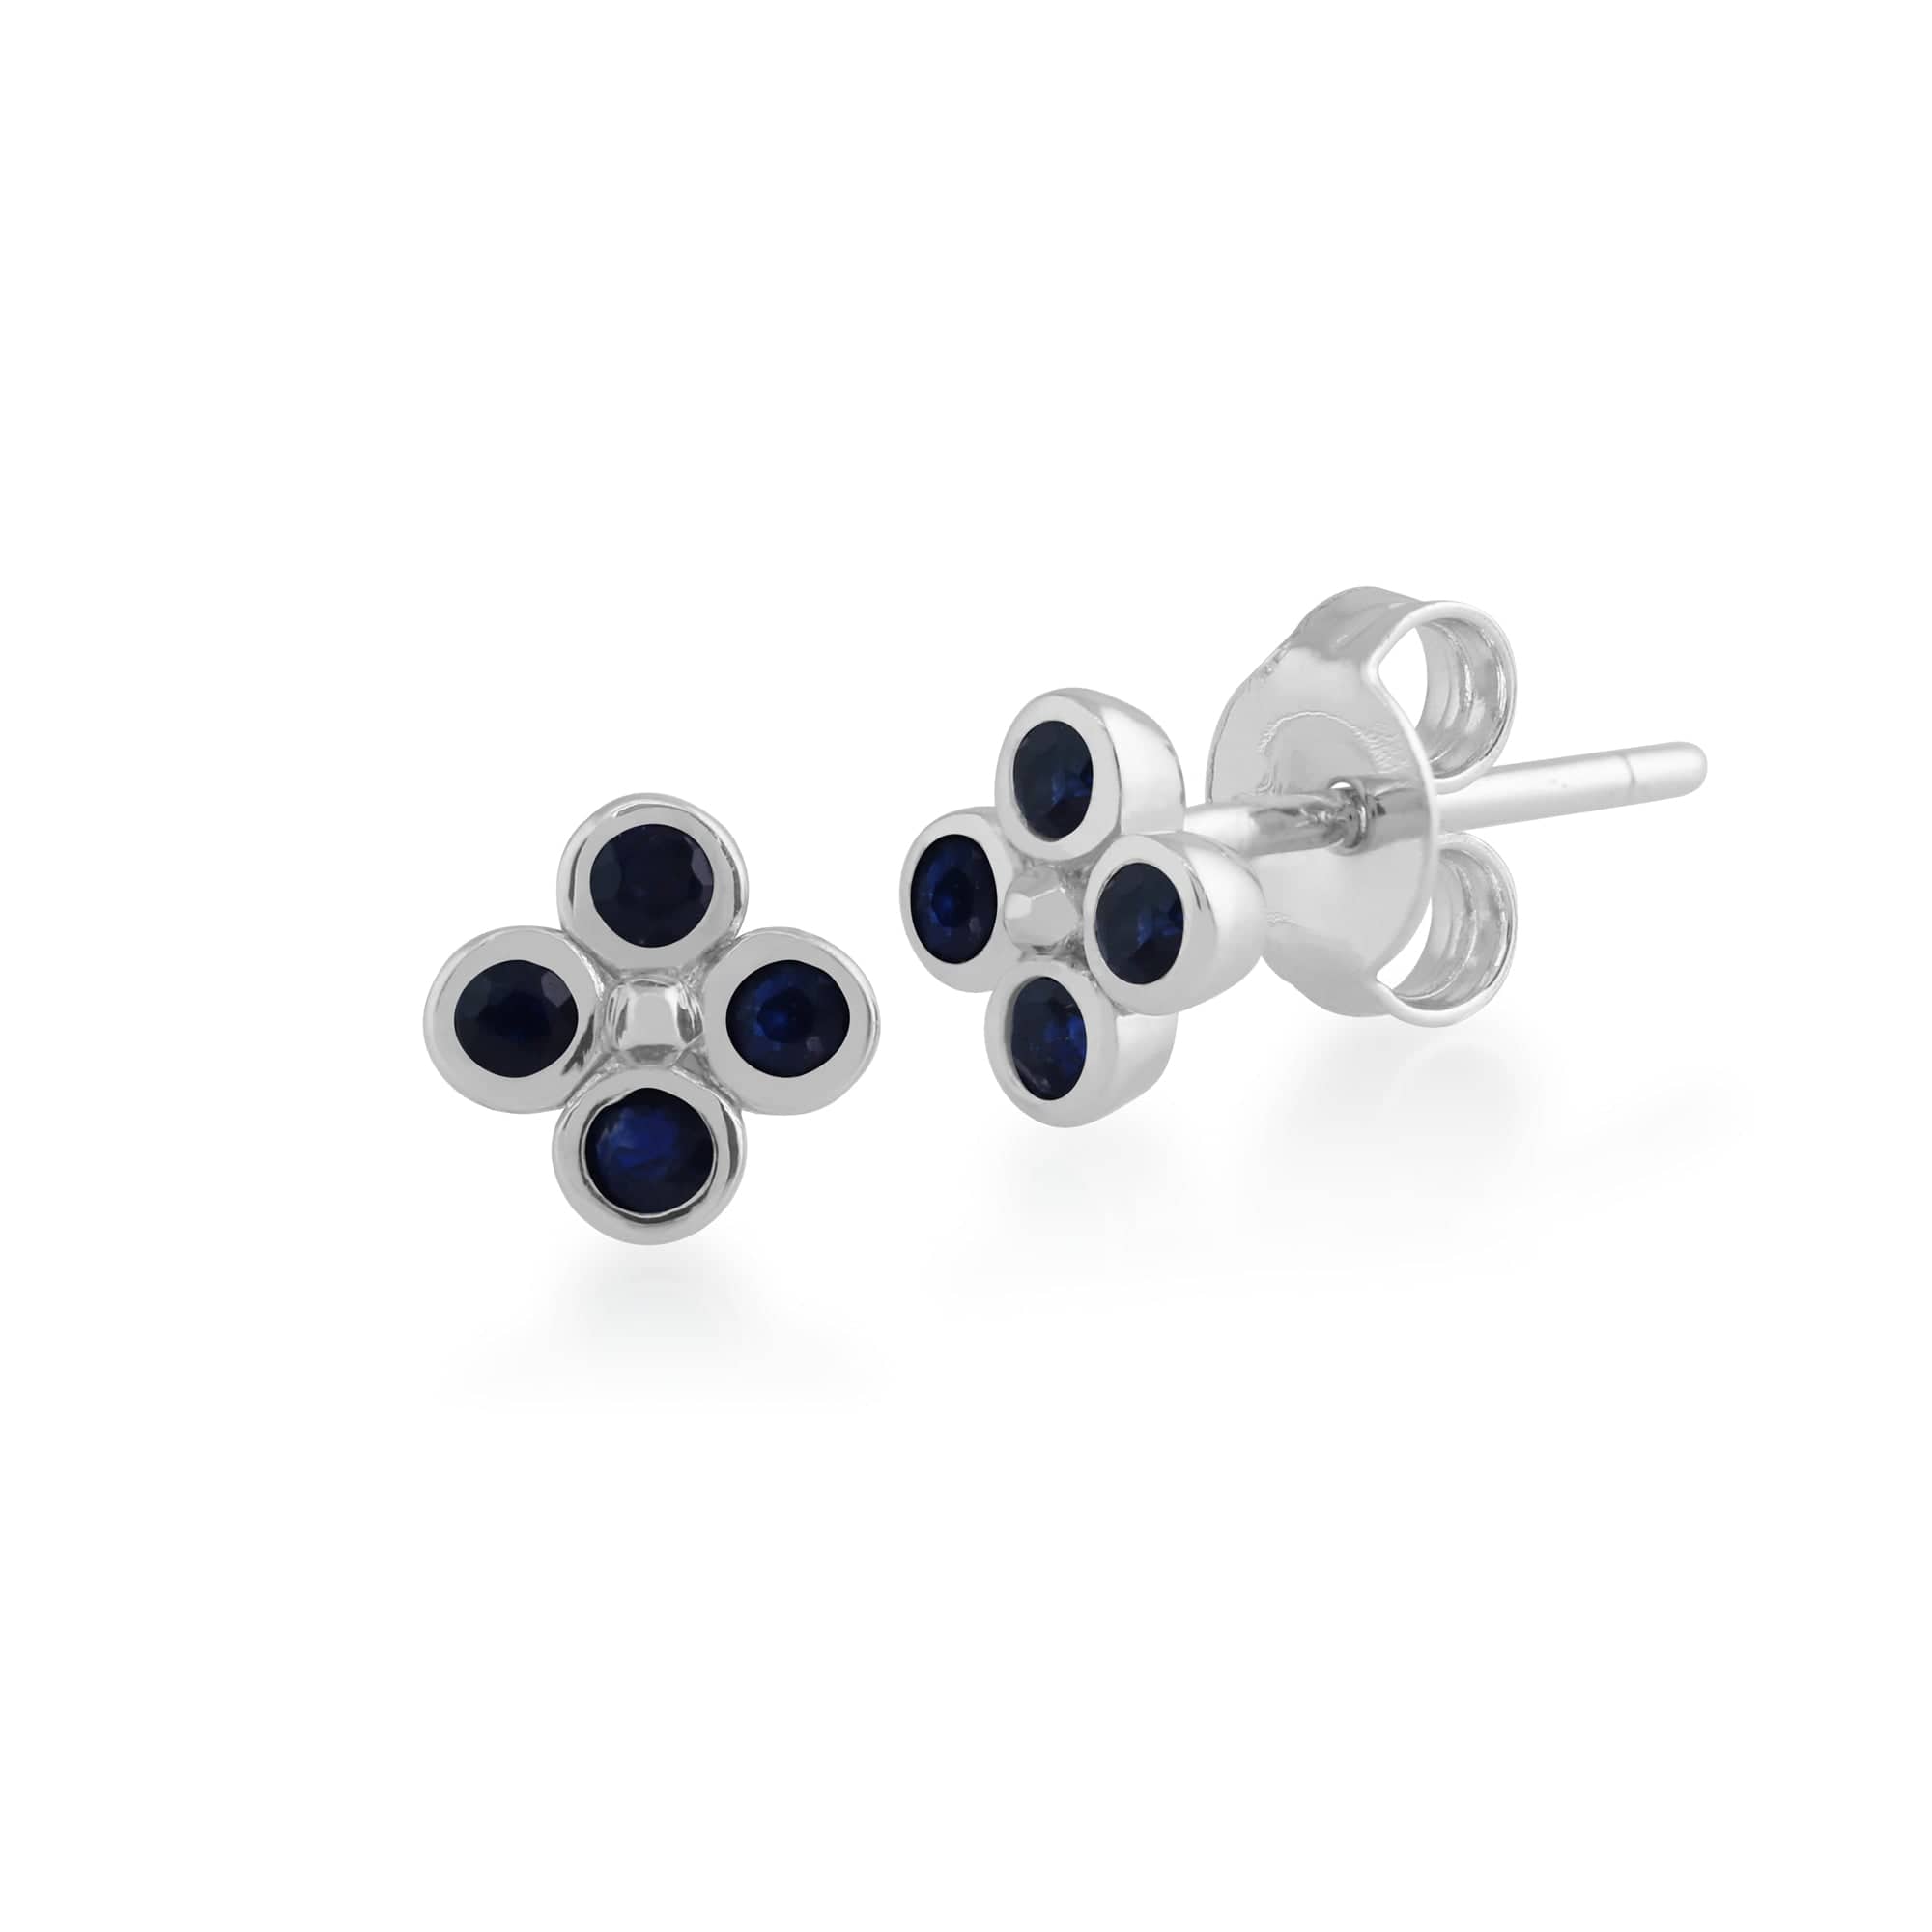 Floral Round Sapphire Clover Stud Earrings & Pendant Set in 925 Sterling Silver - Gemondo